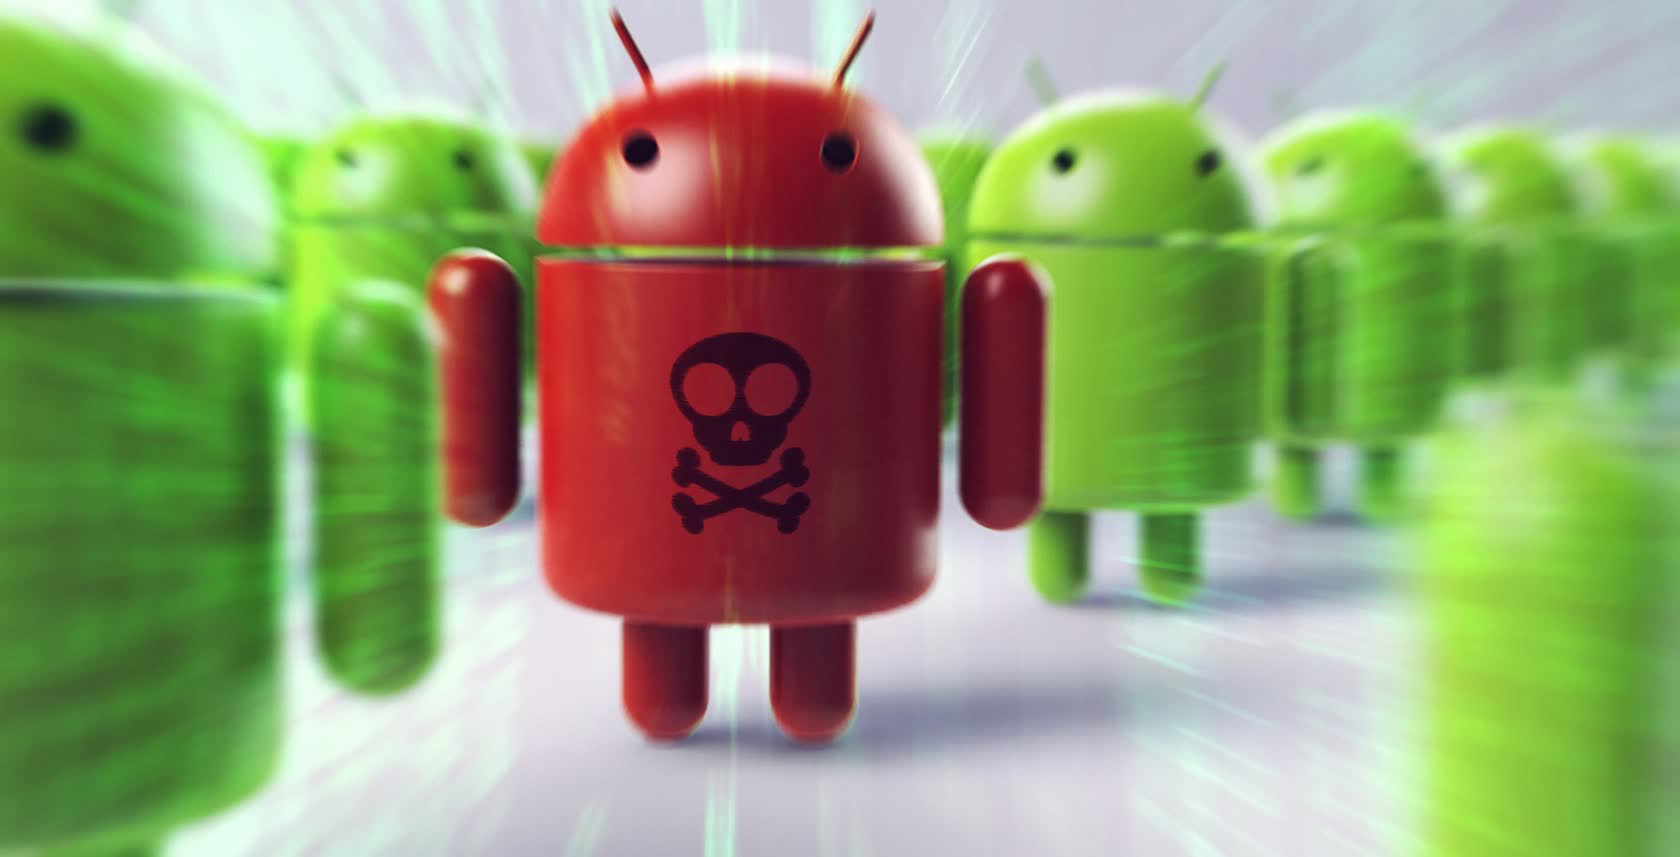 Malware-loaded Google Play app with 100,000 downloads caught stealing Facebook passwords